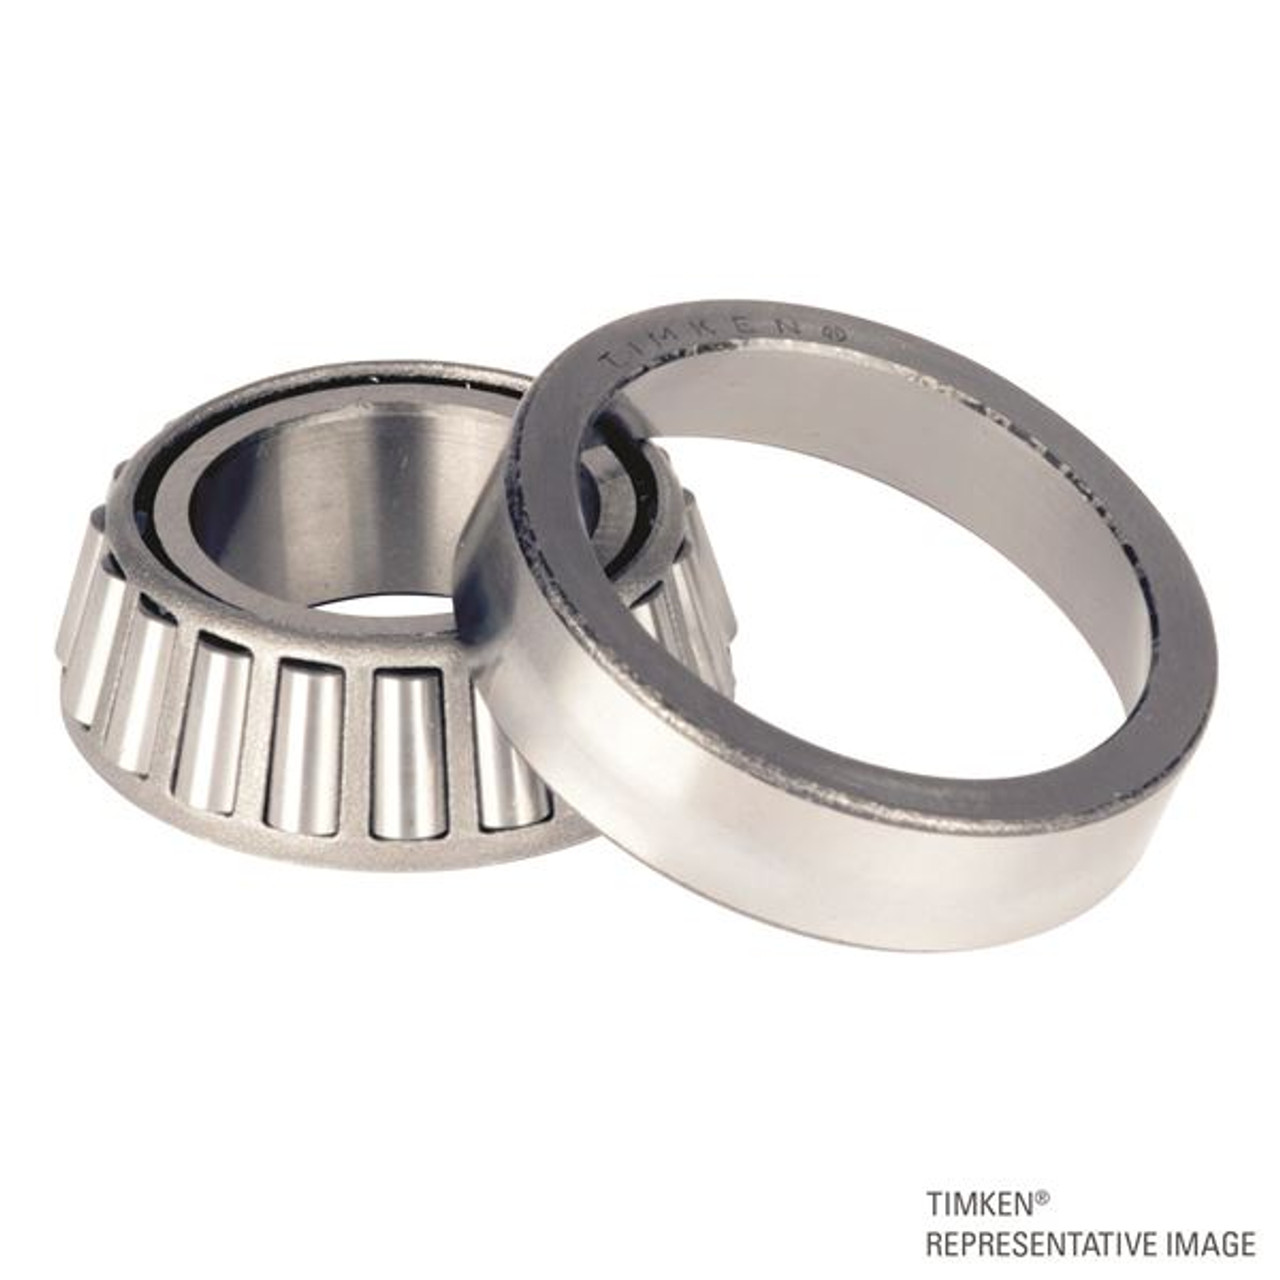 Timken® Single Row Cup & Cone Assembly - Precision Class  NA12581SW-90014